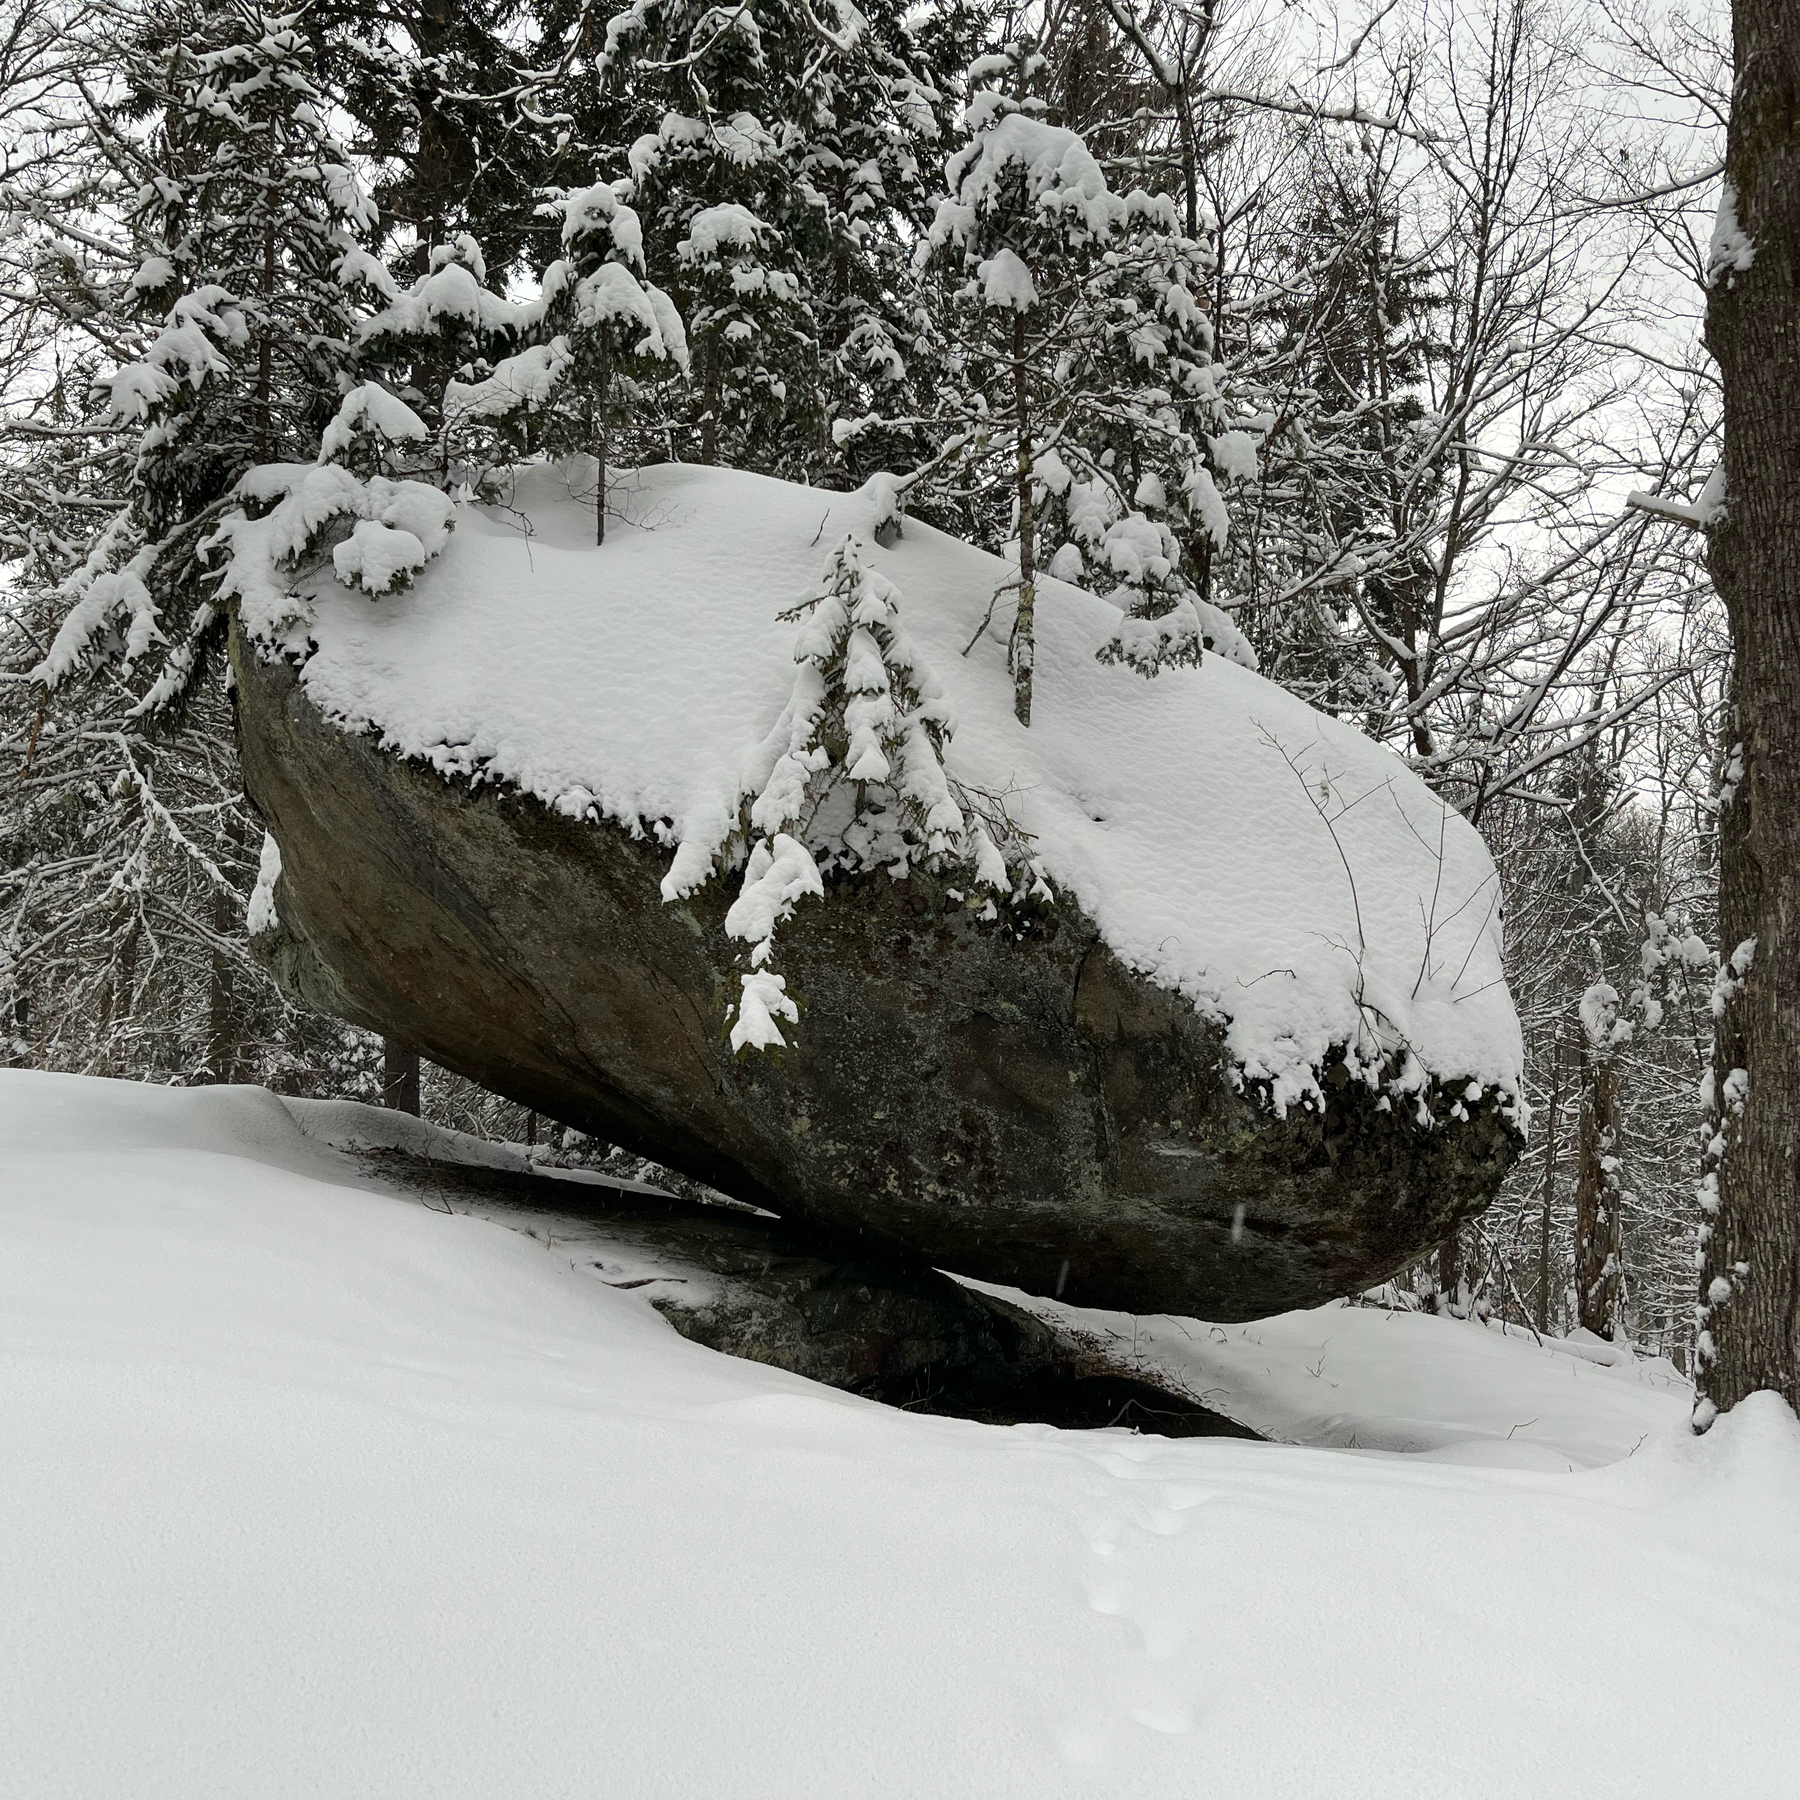 A giant bolder covered with snow and trees, balancing on a tiny bit of its underside.